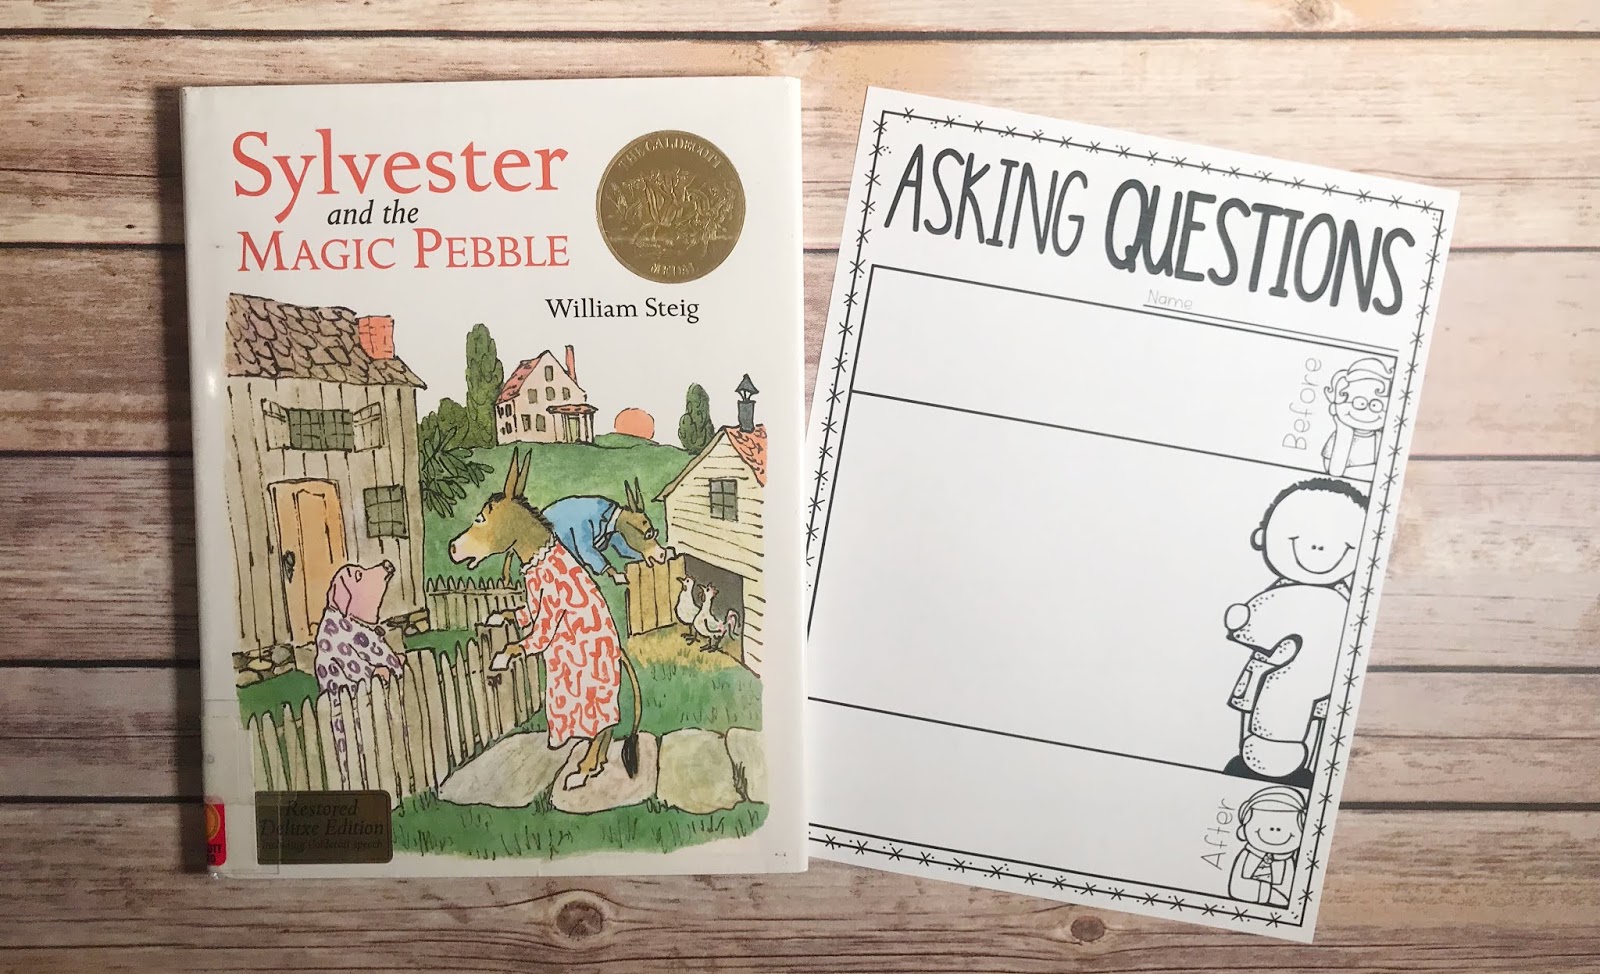 Mentor text with text "Sylvester and the Magic Pebble" and graphic organizer with text "Asking Questions" 